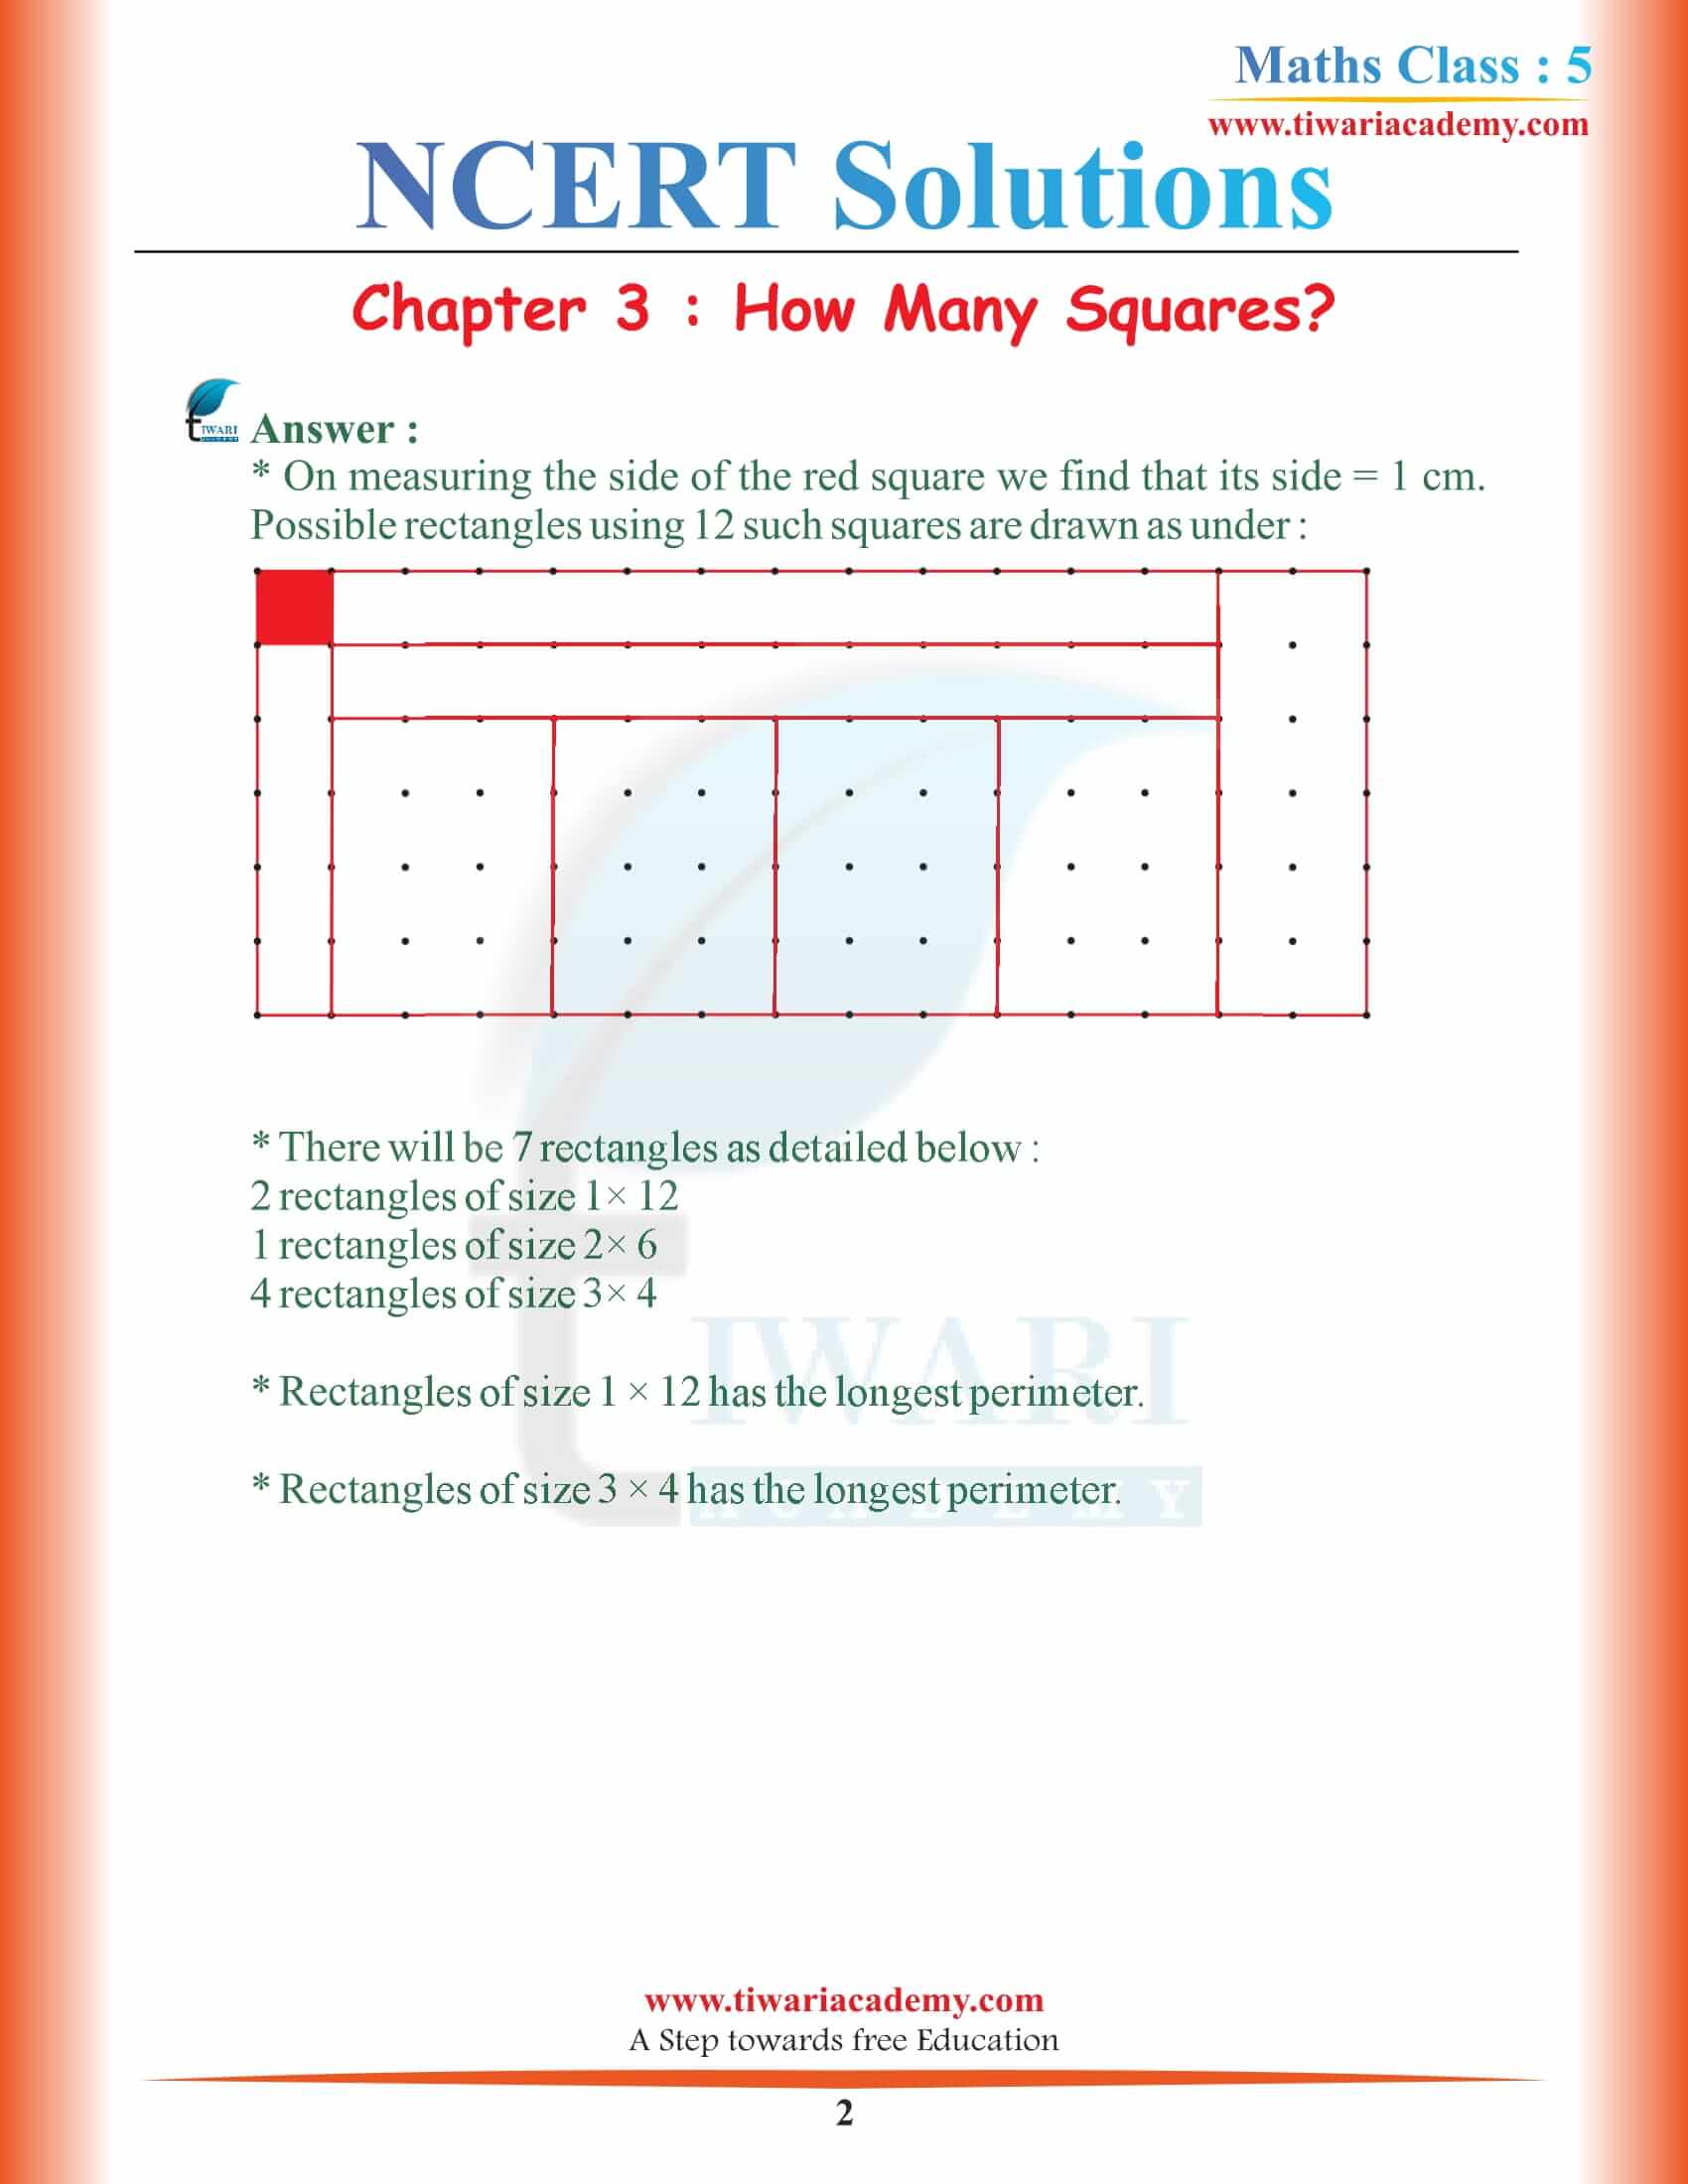 NCERT Solutions for Class 5 Maths Chapter 3 in PDF